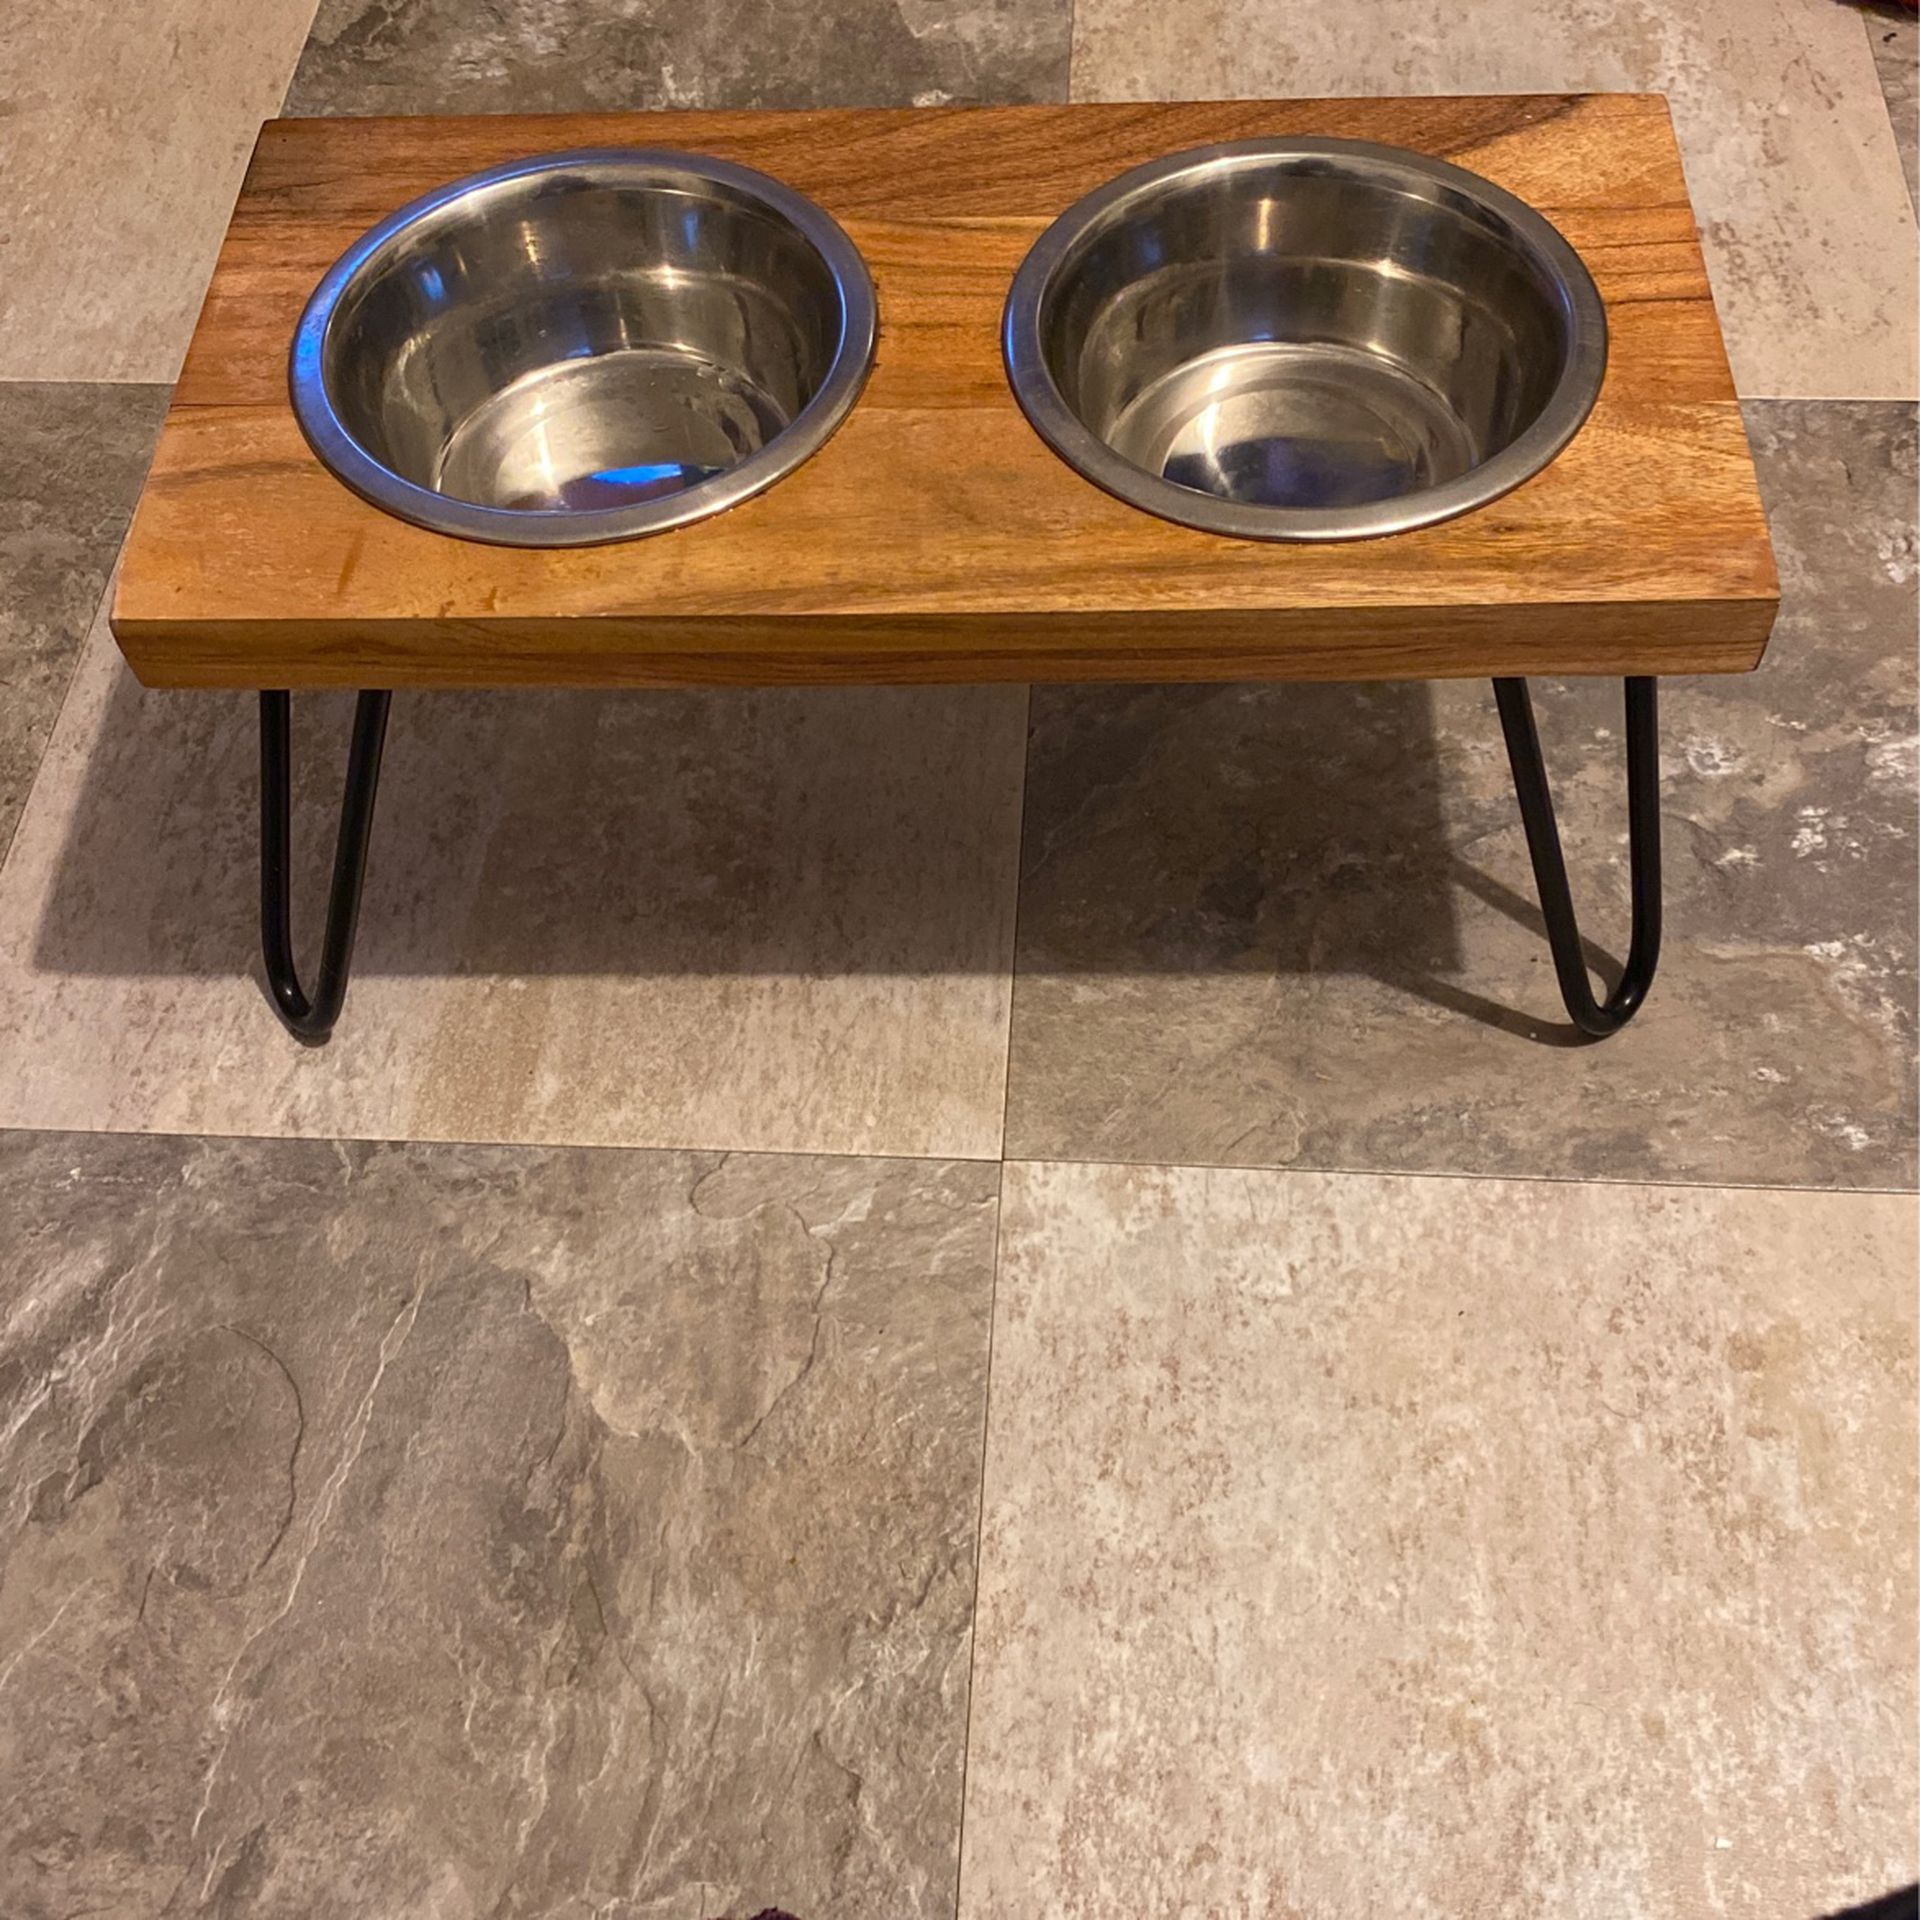 EveryYay Better Together Elevated Wood Double Diner with Stainless-Steel Bowls for Dogs, 4.6 Cups